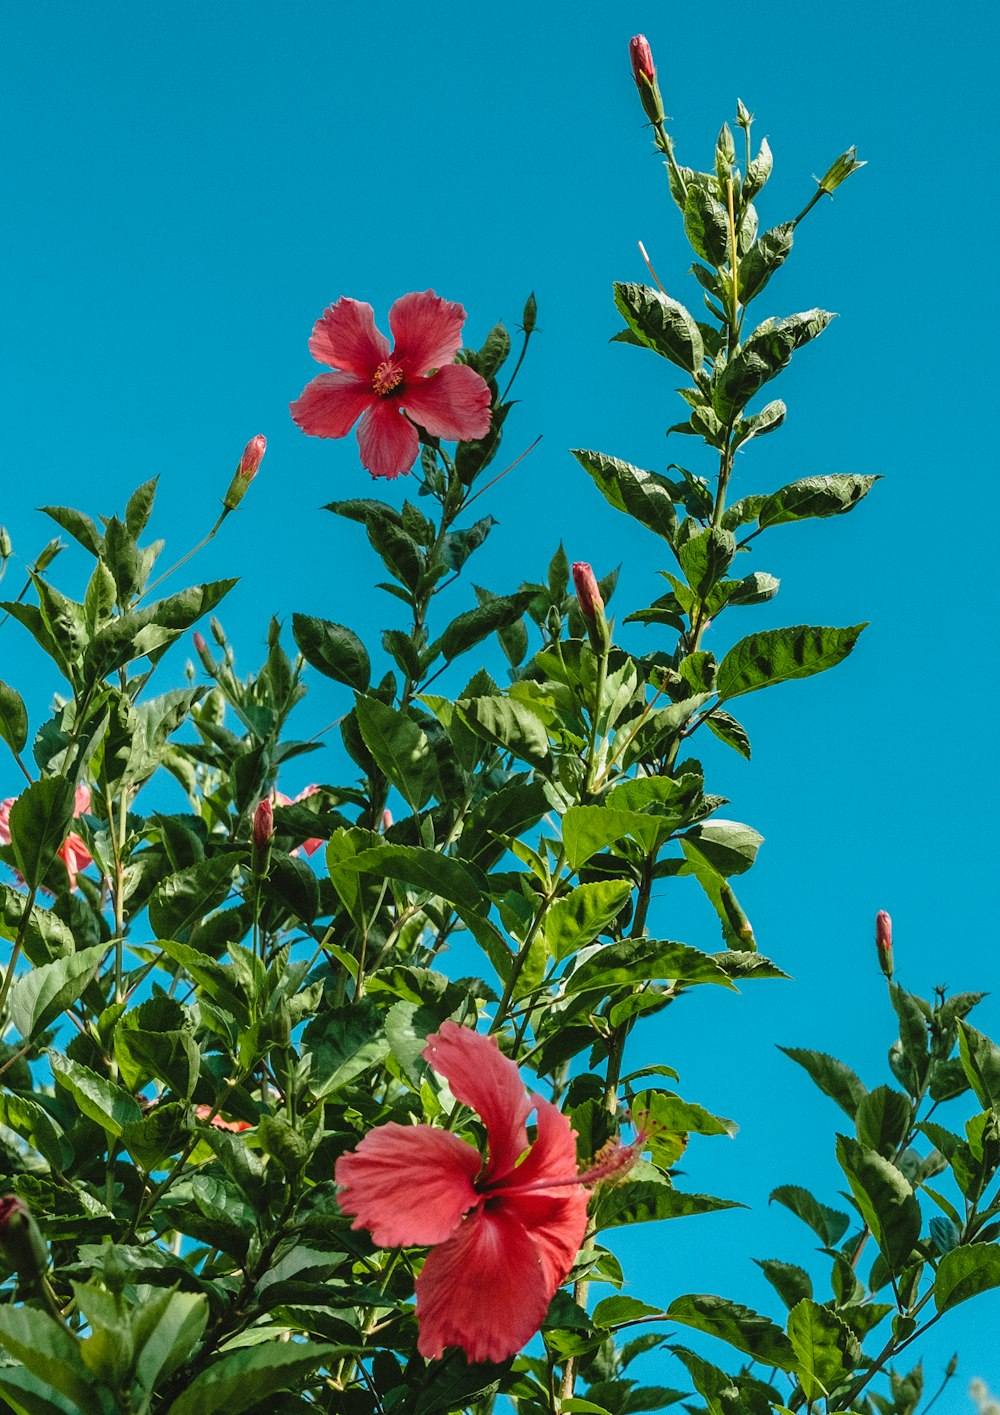 pink flower with green leaves under blue sky during daytime